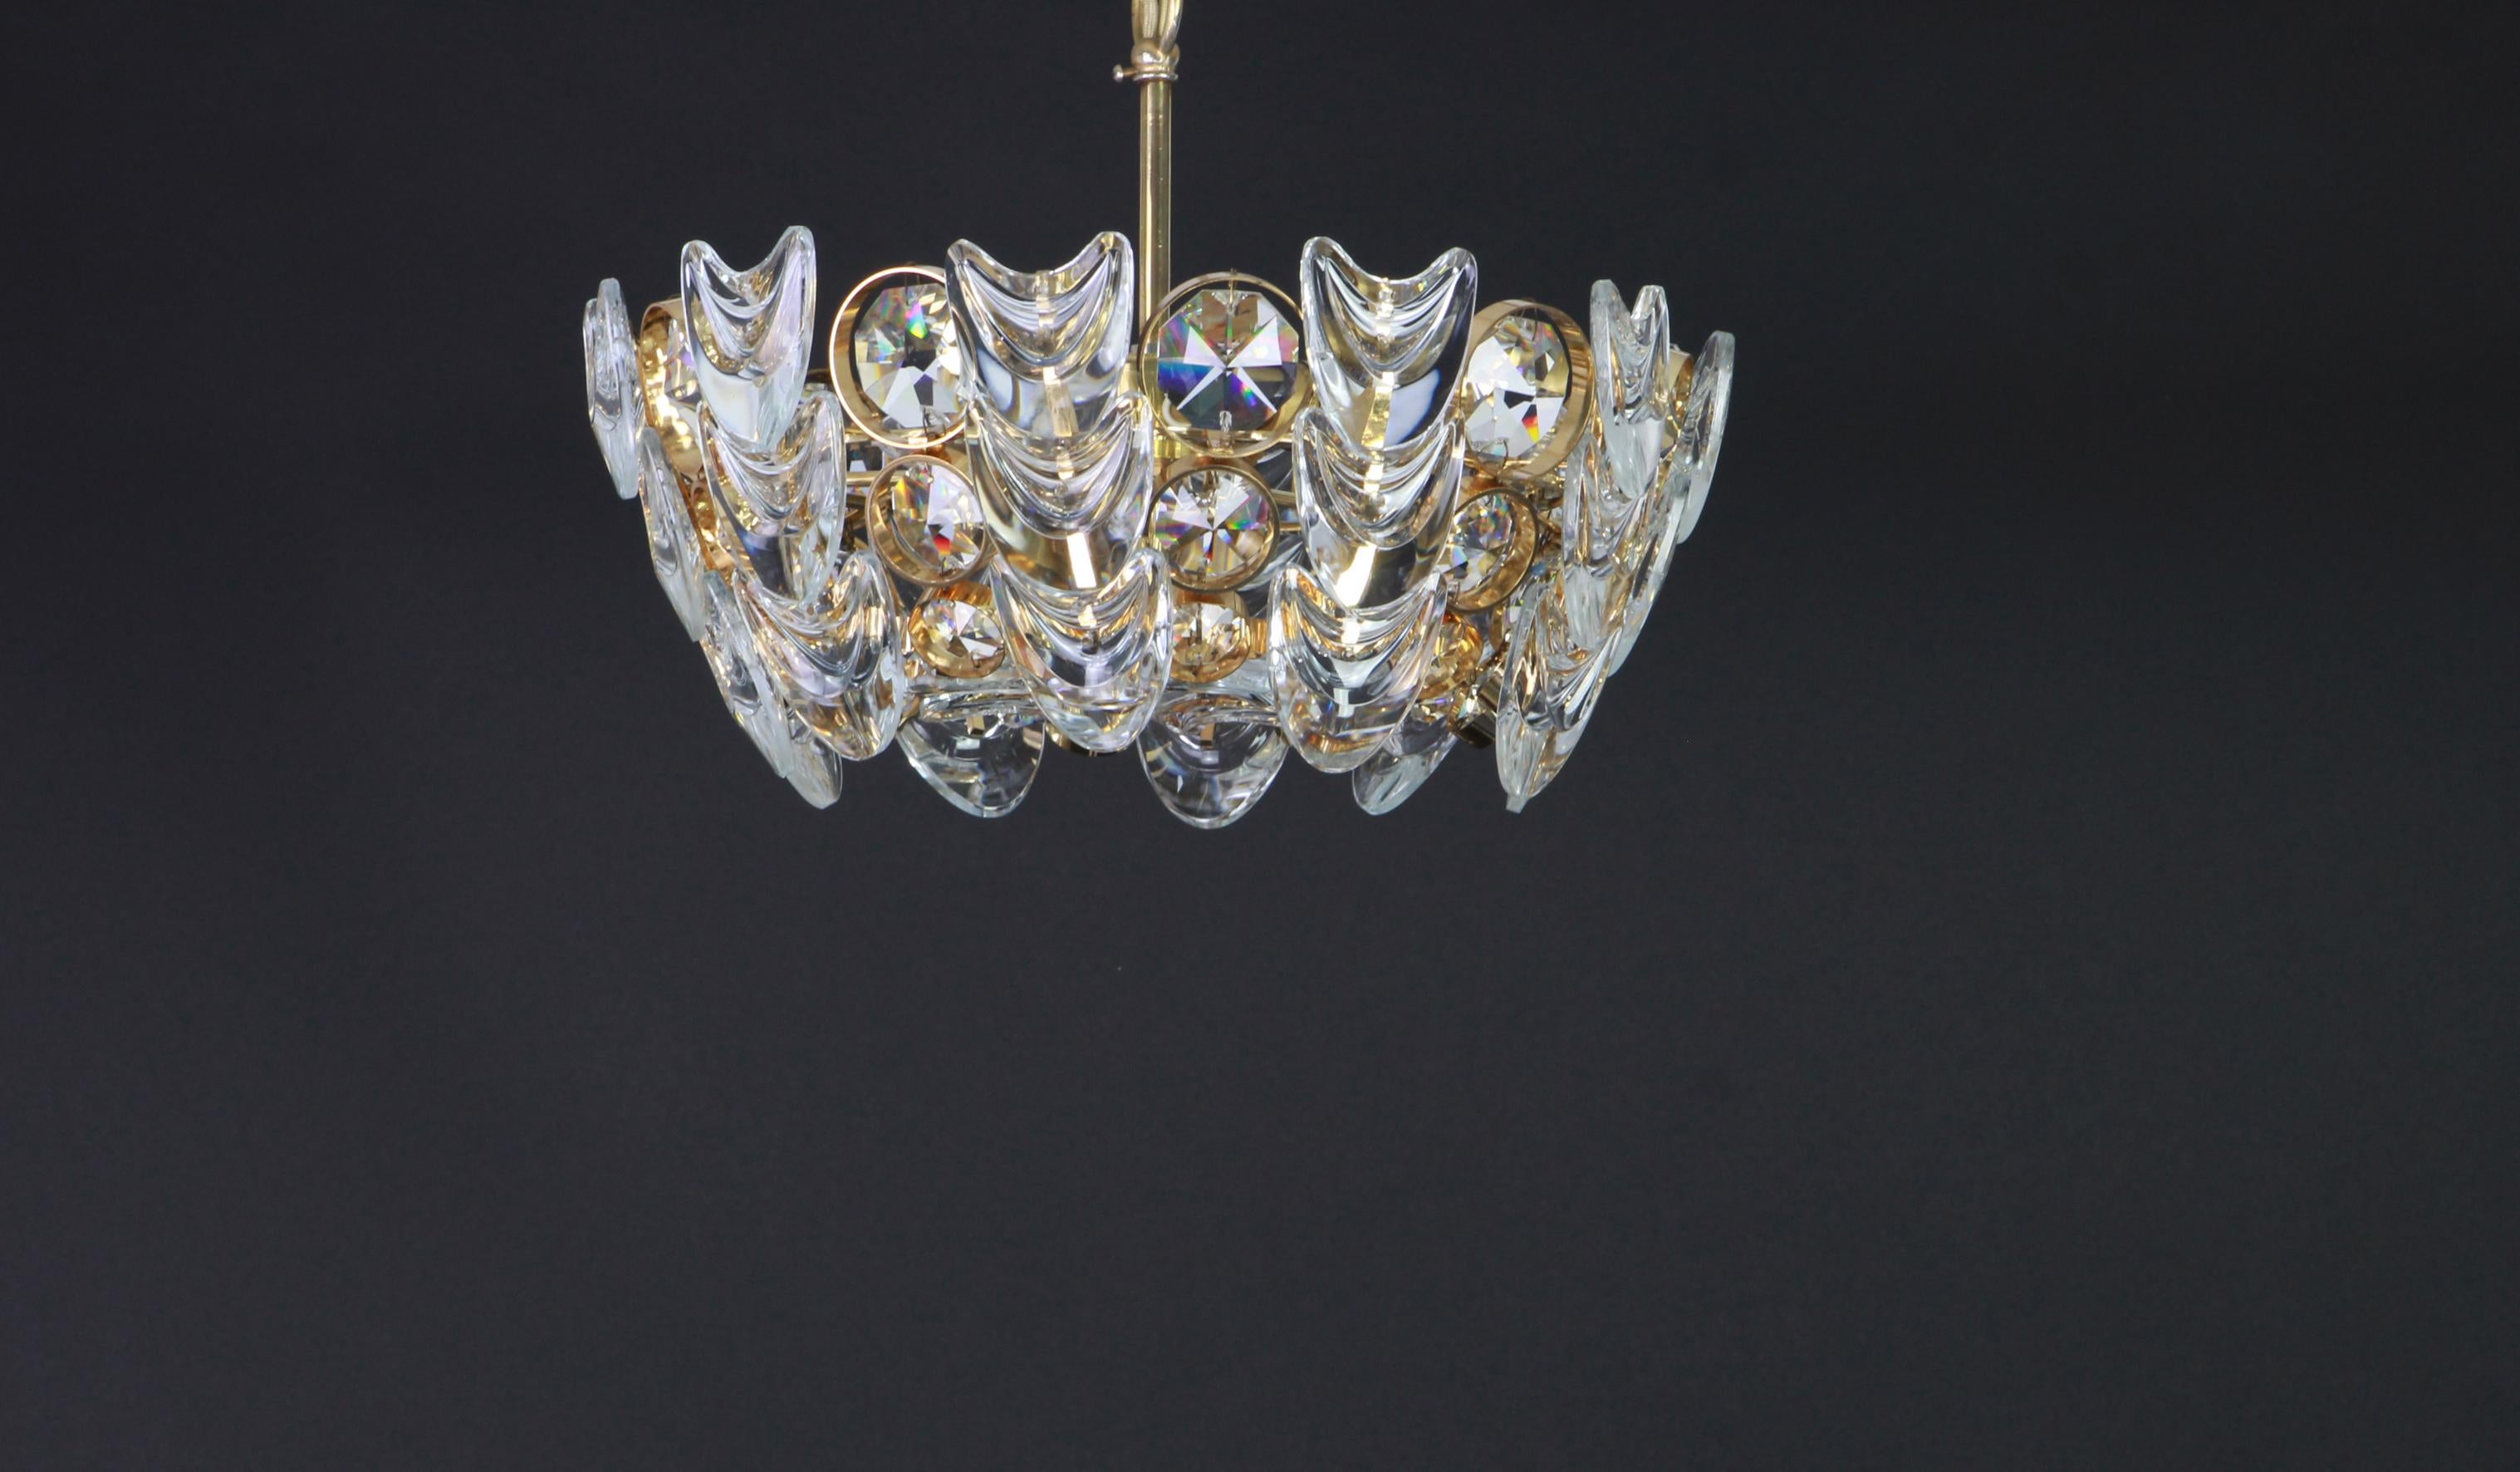 Petite Gilt Brass and Crystal Glass Encrusted Chandelier by Palwa, Germany 1970s For Sale 1